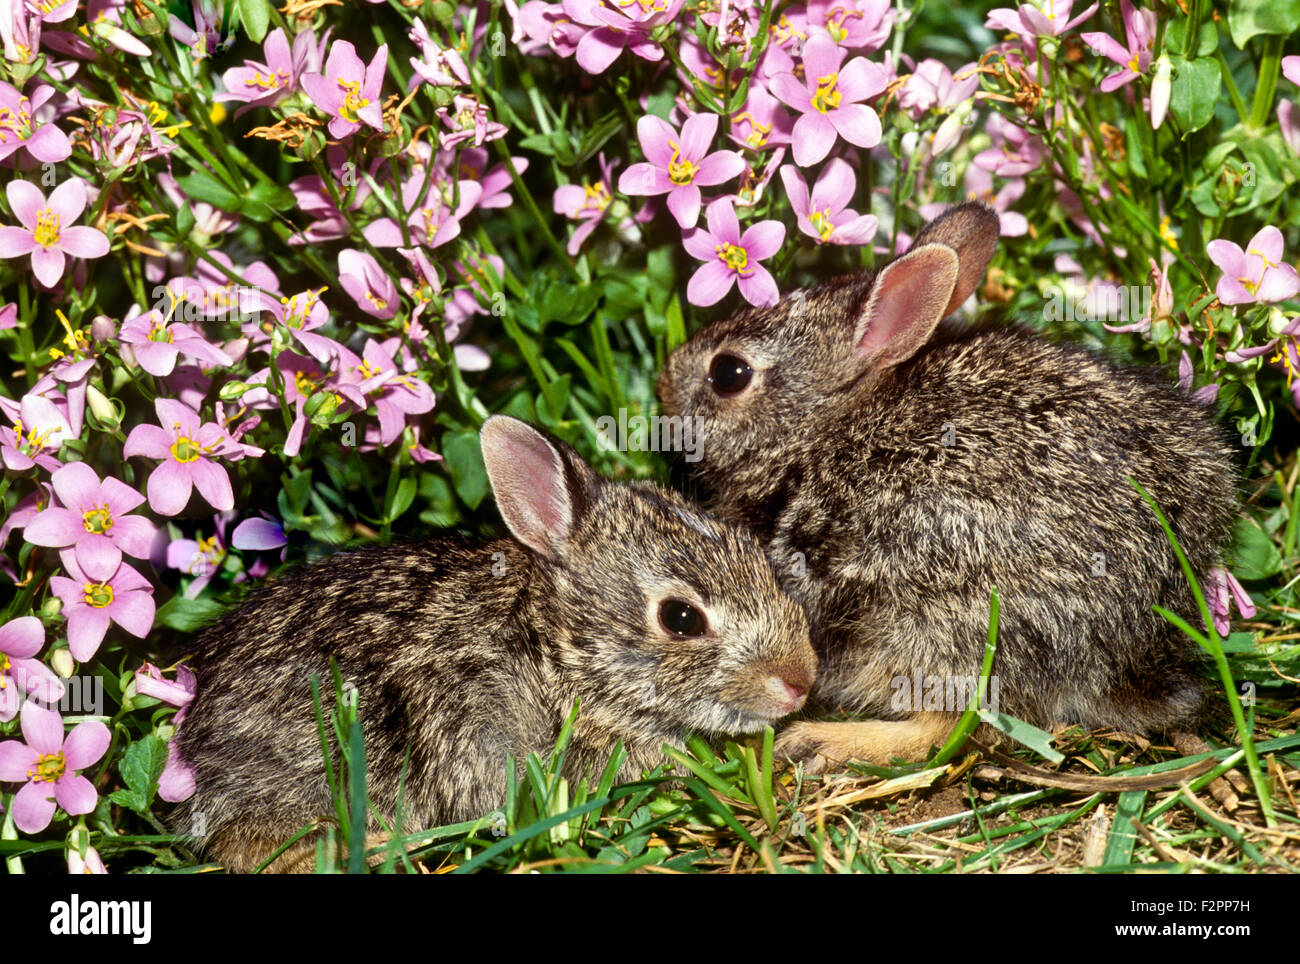 Two baby rabbits cuddle and hide together at the border of the garden in pink verbena flowers, Missouri, USA Stock Photo